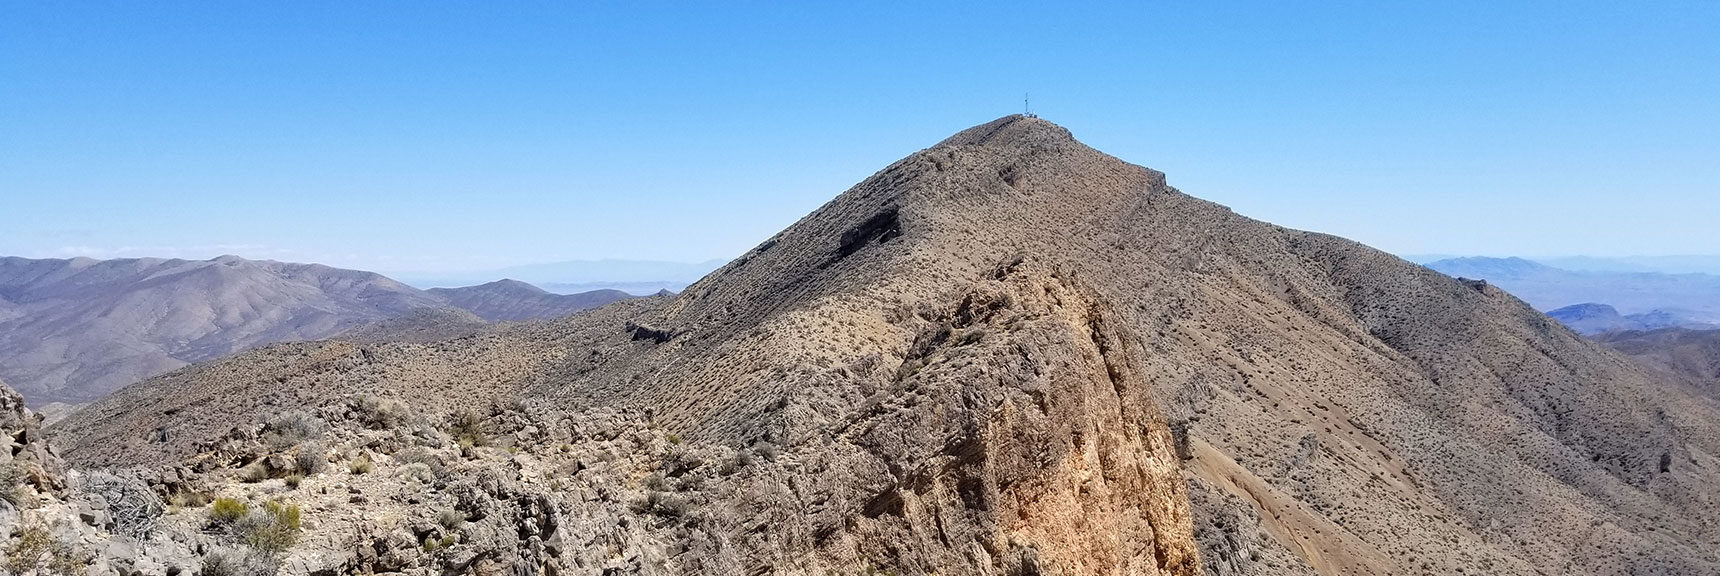 Gass Peak Nevada Summit viewed from 500ft and 1/4th mile below.